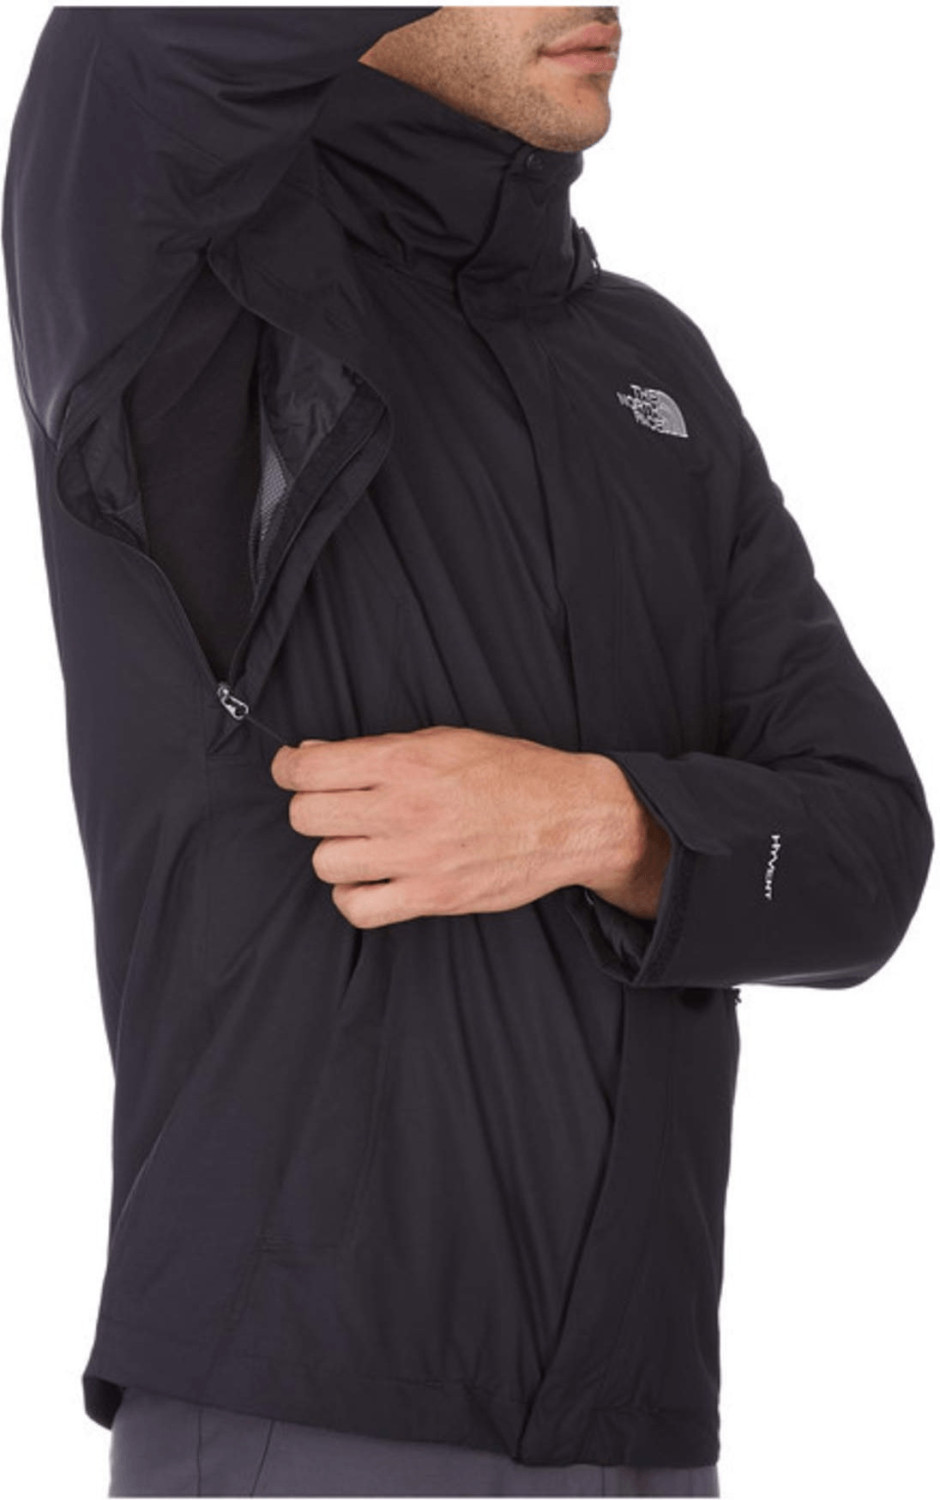 Buy The North Face Men's Evolution II Triclimate Jacket TNF Black from ...